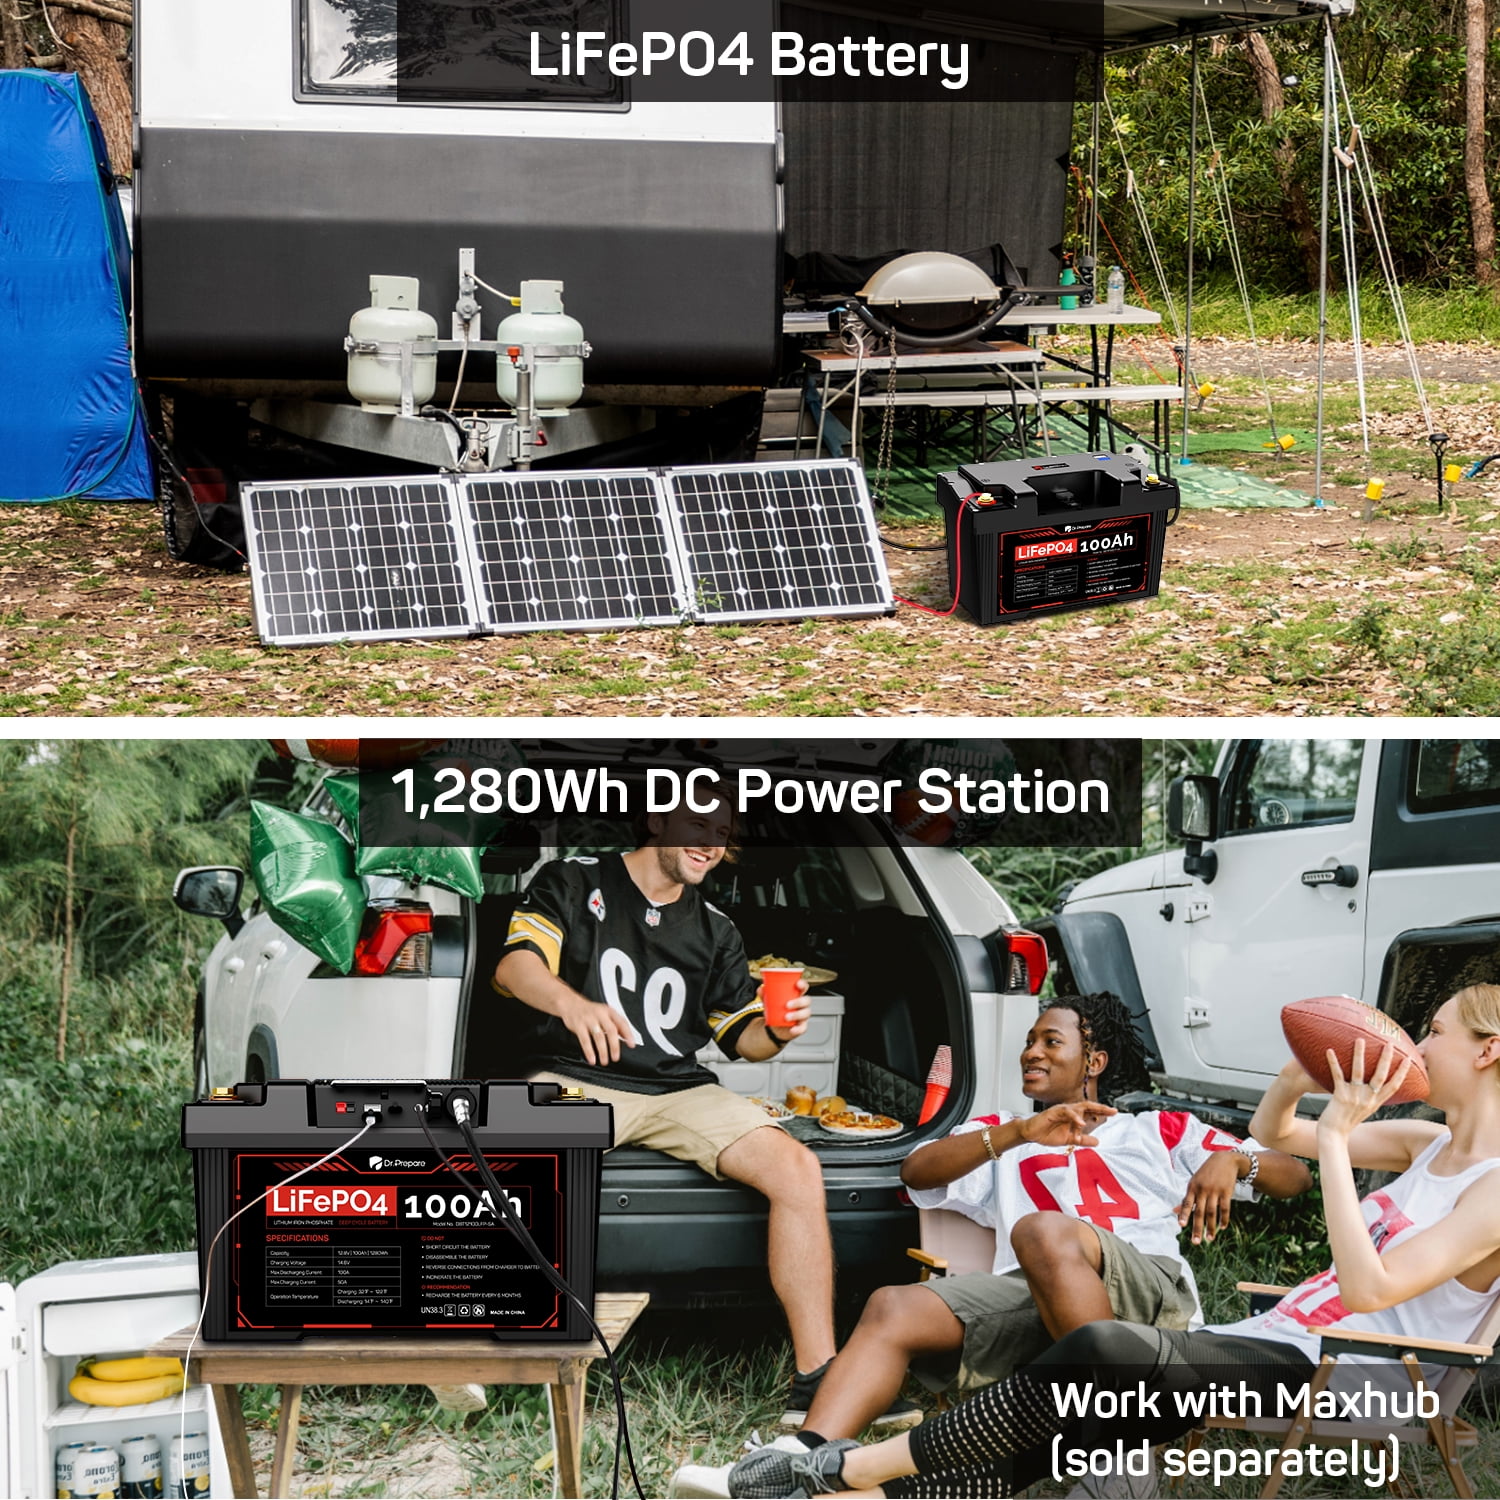 DR.PREPARE 12V 100Ah LiFePO4 Battery with Hub, 1280Wh Portable Power  Station Solar Powered Battery, Battery Backup Power Supply for Home, CPAP